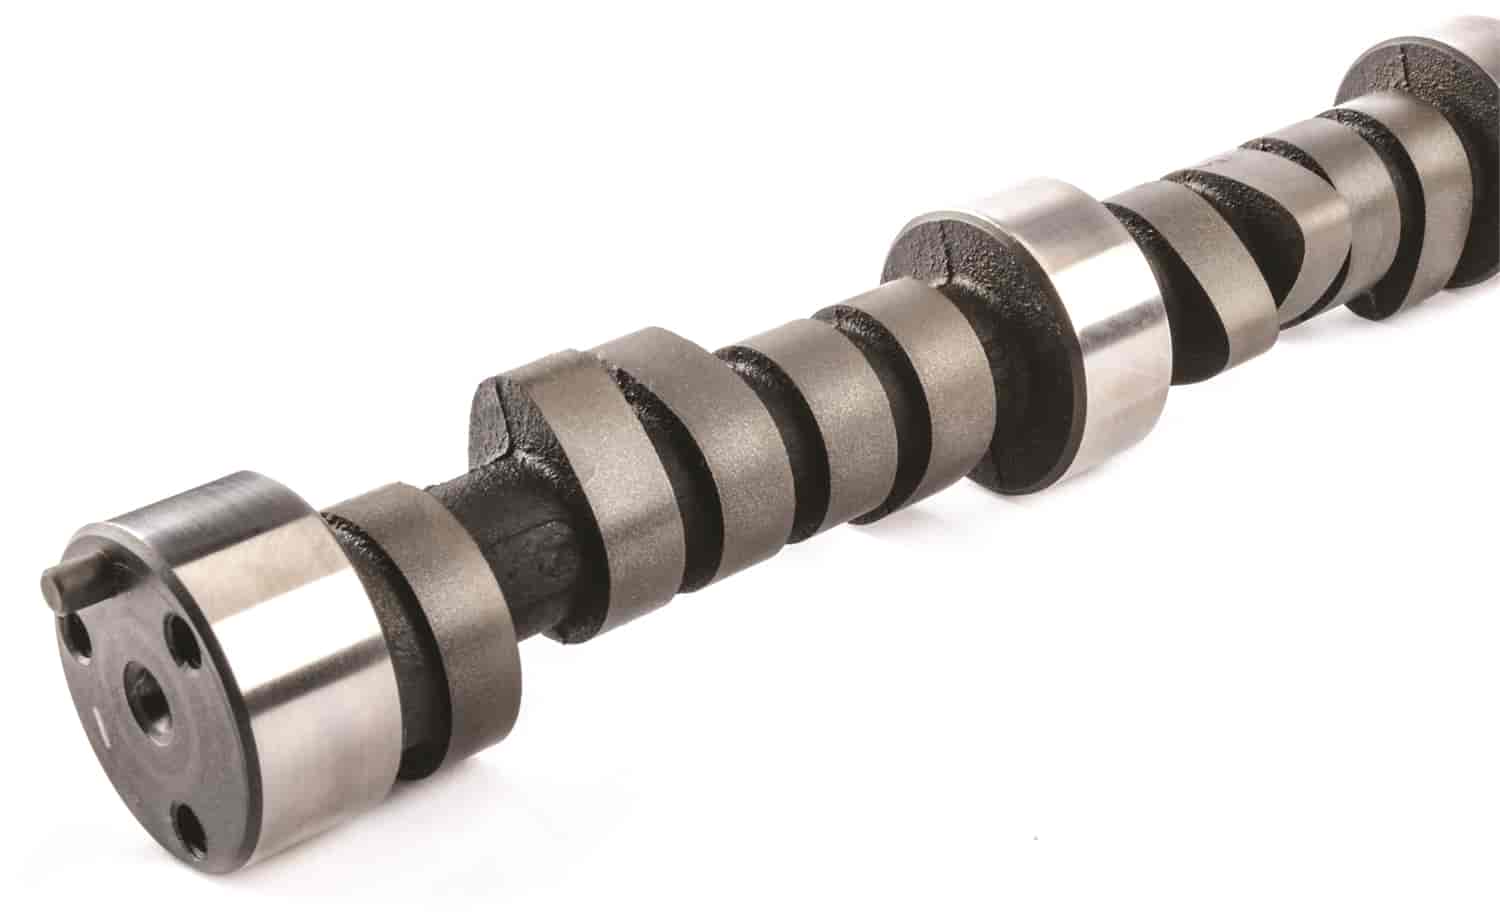 Mutha" Thumpr Hydraulic Flat Tappet Camshaft Lift .489"/.476" Duration 287/305 RPM Range 2200 to 6100